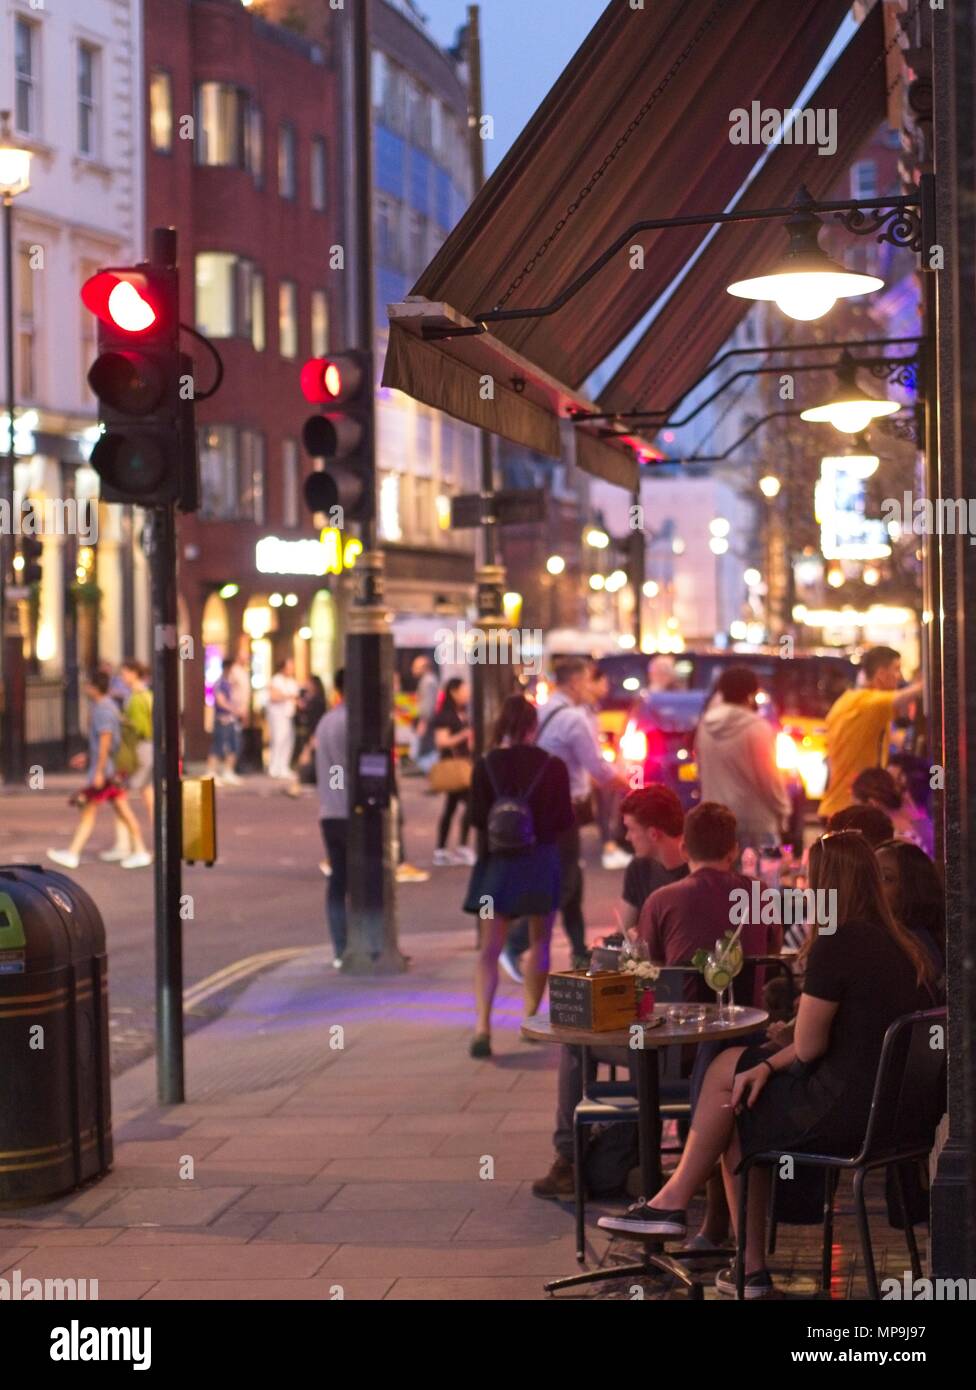 London, UK - April 16 2018: People enjoying the evening at Cafes and Bars on the busy Regent Street Stock Photo